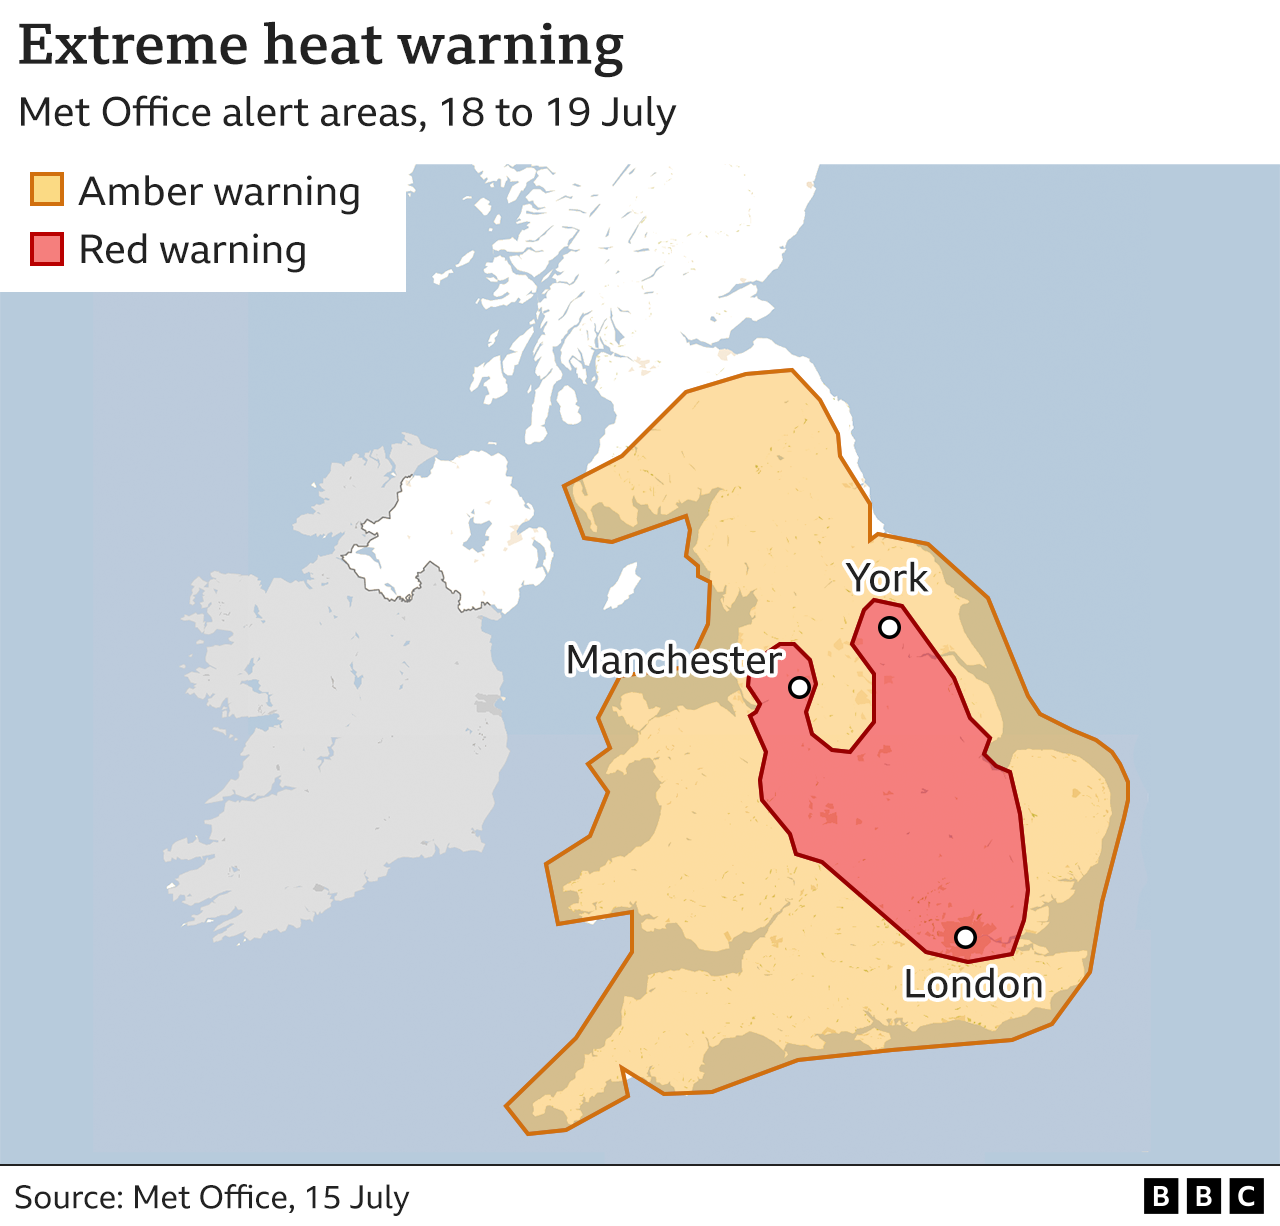 Extent of extreme heat warning